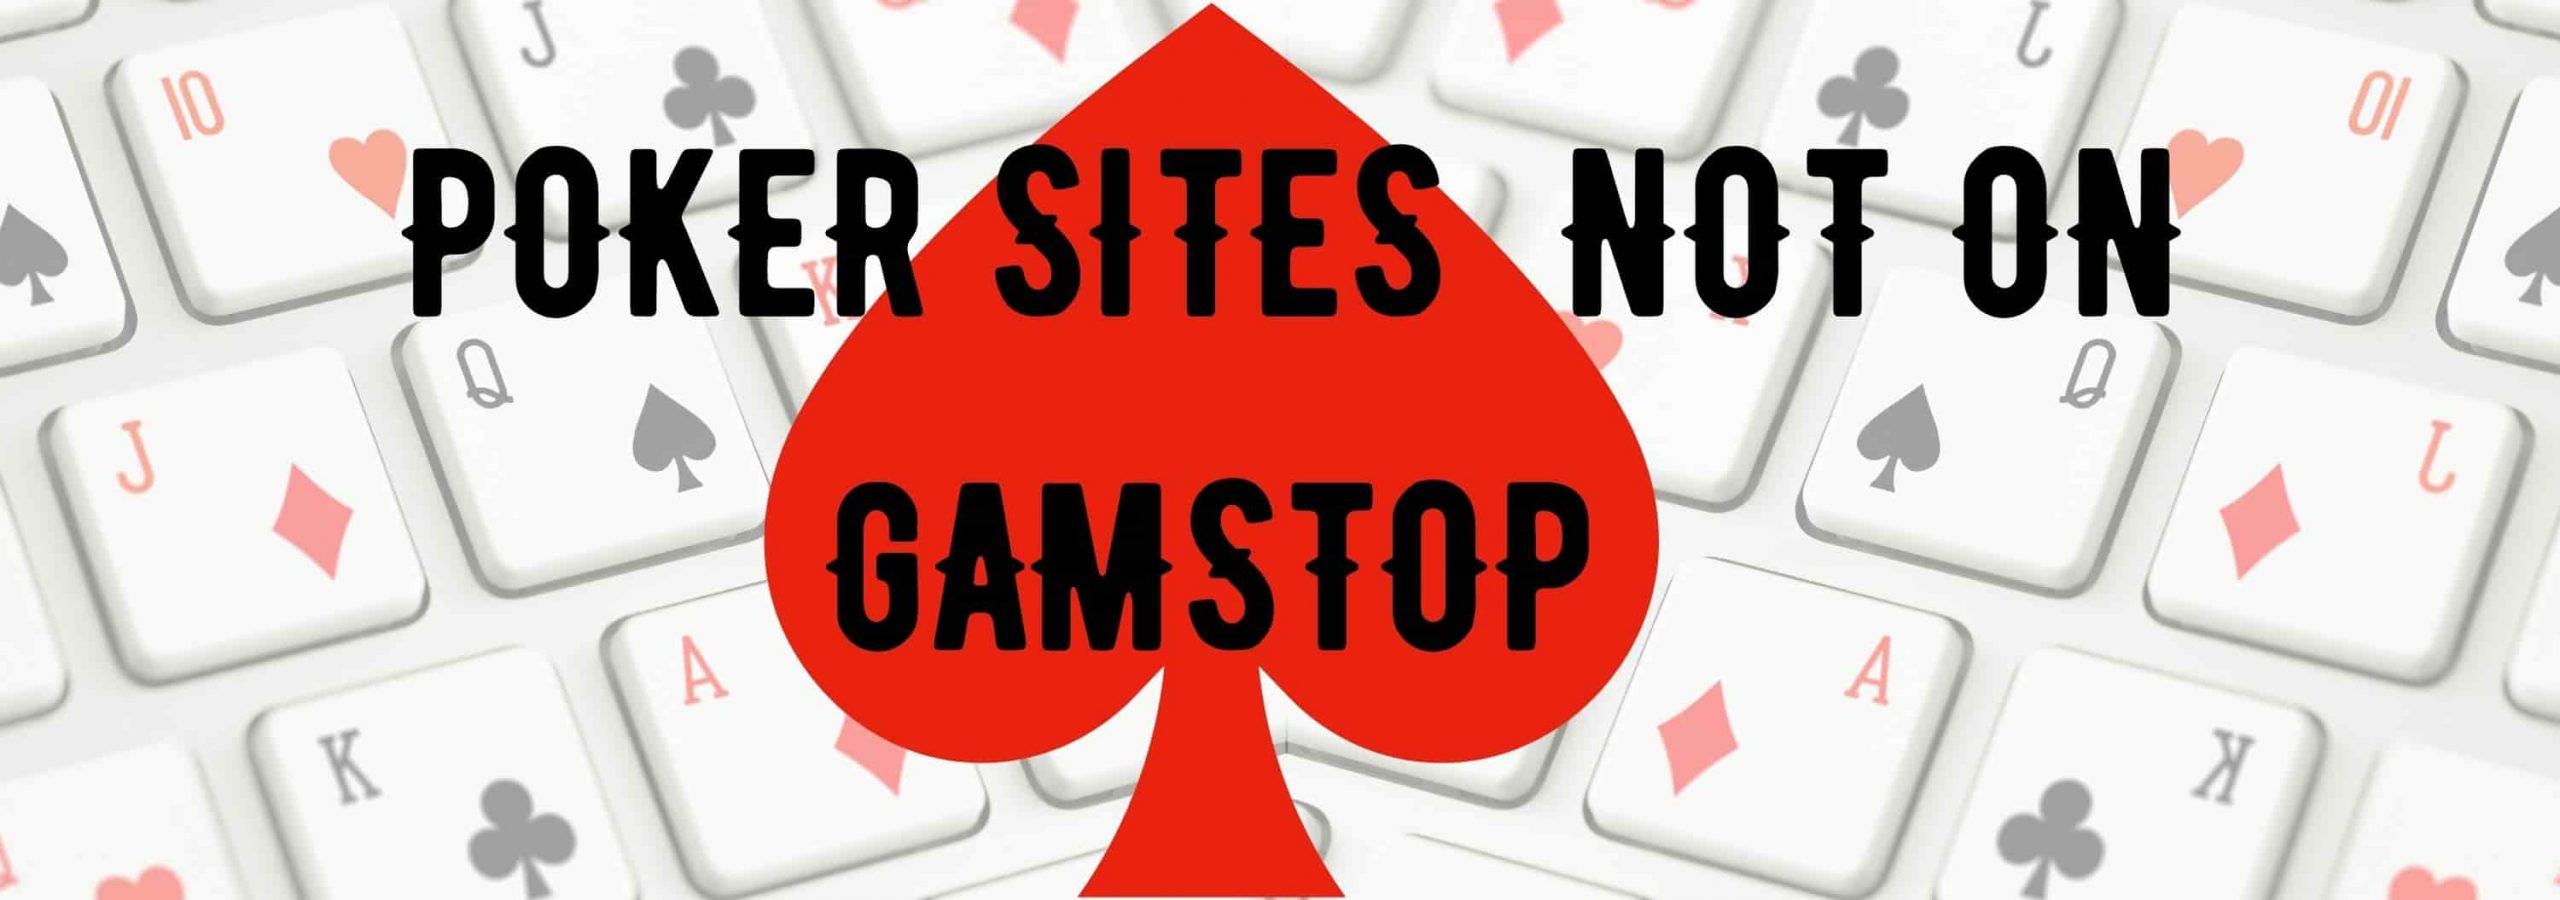 poker sites not blocked by gamstop